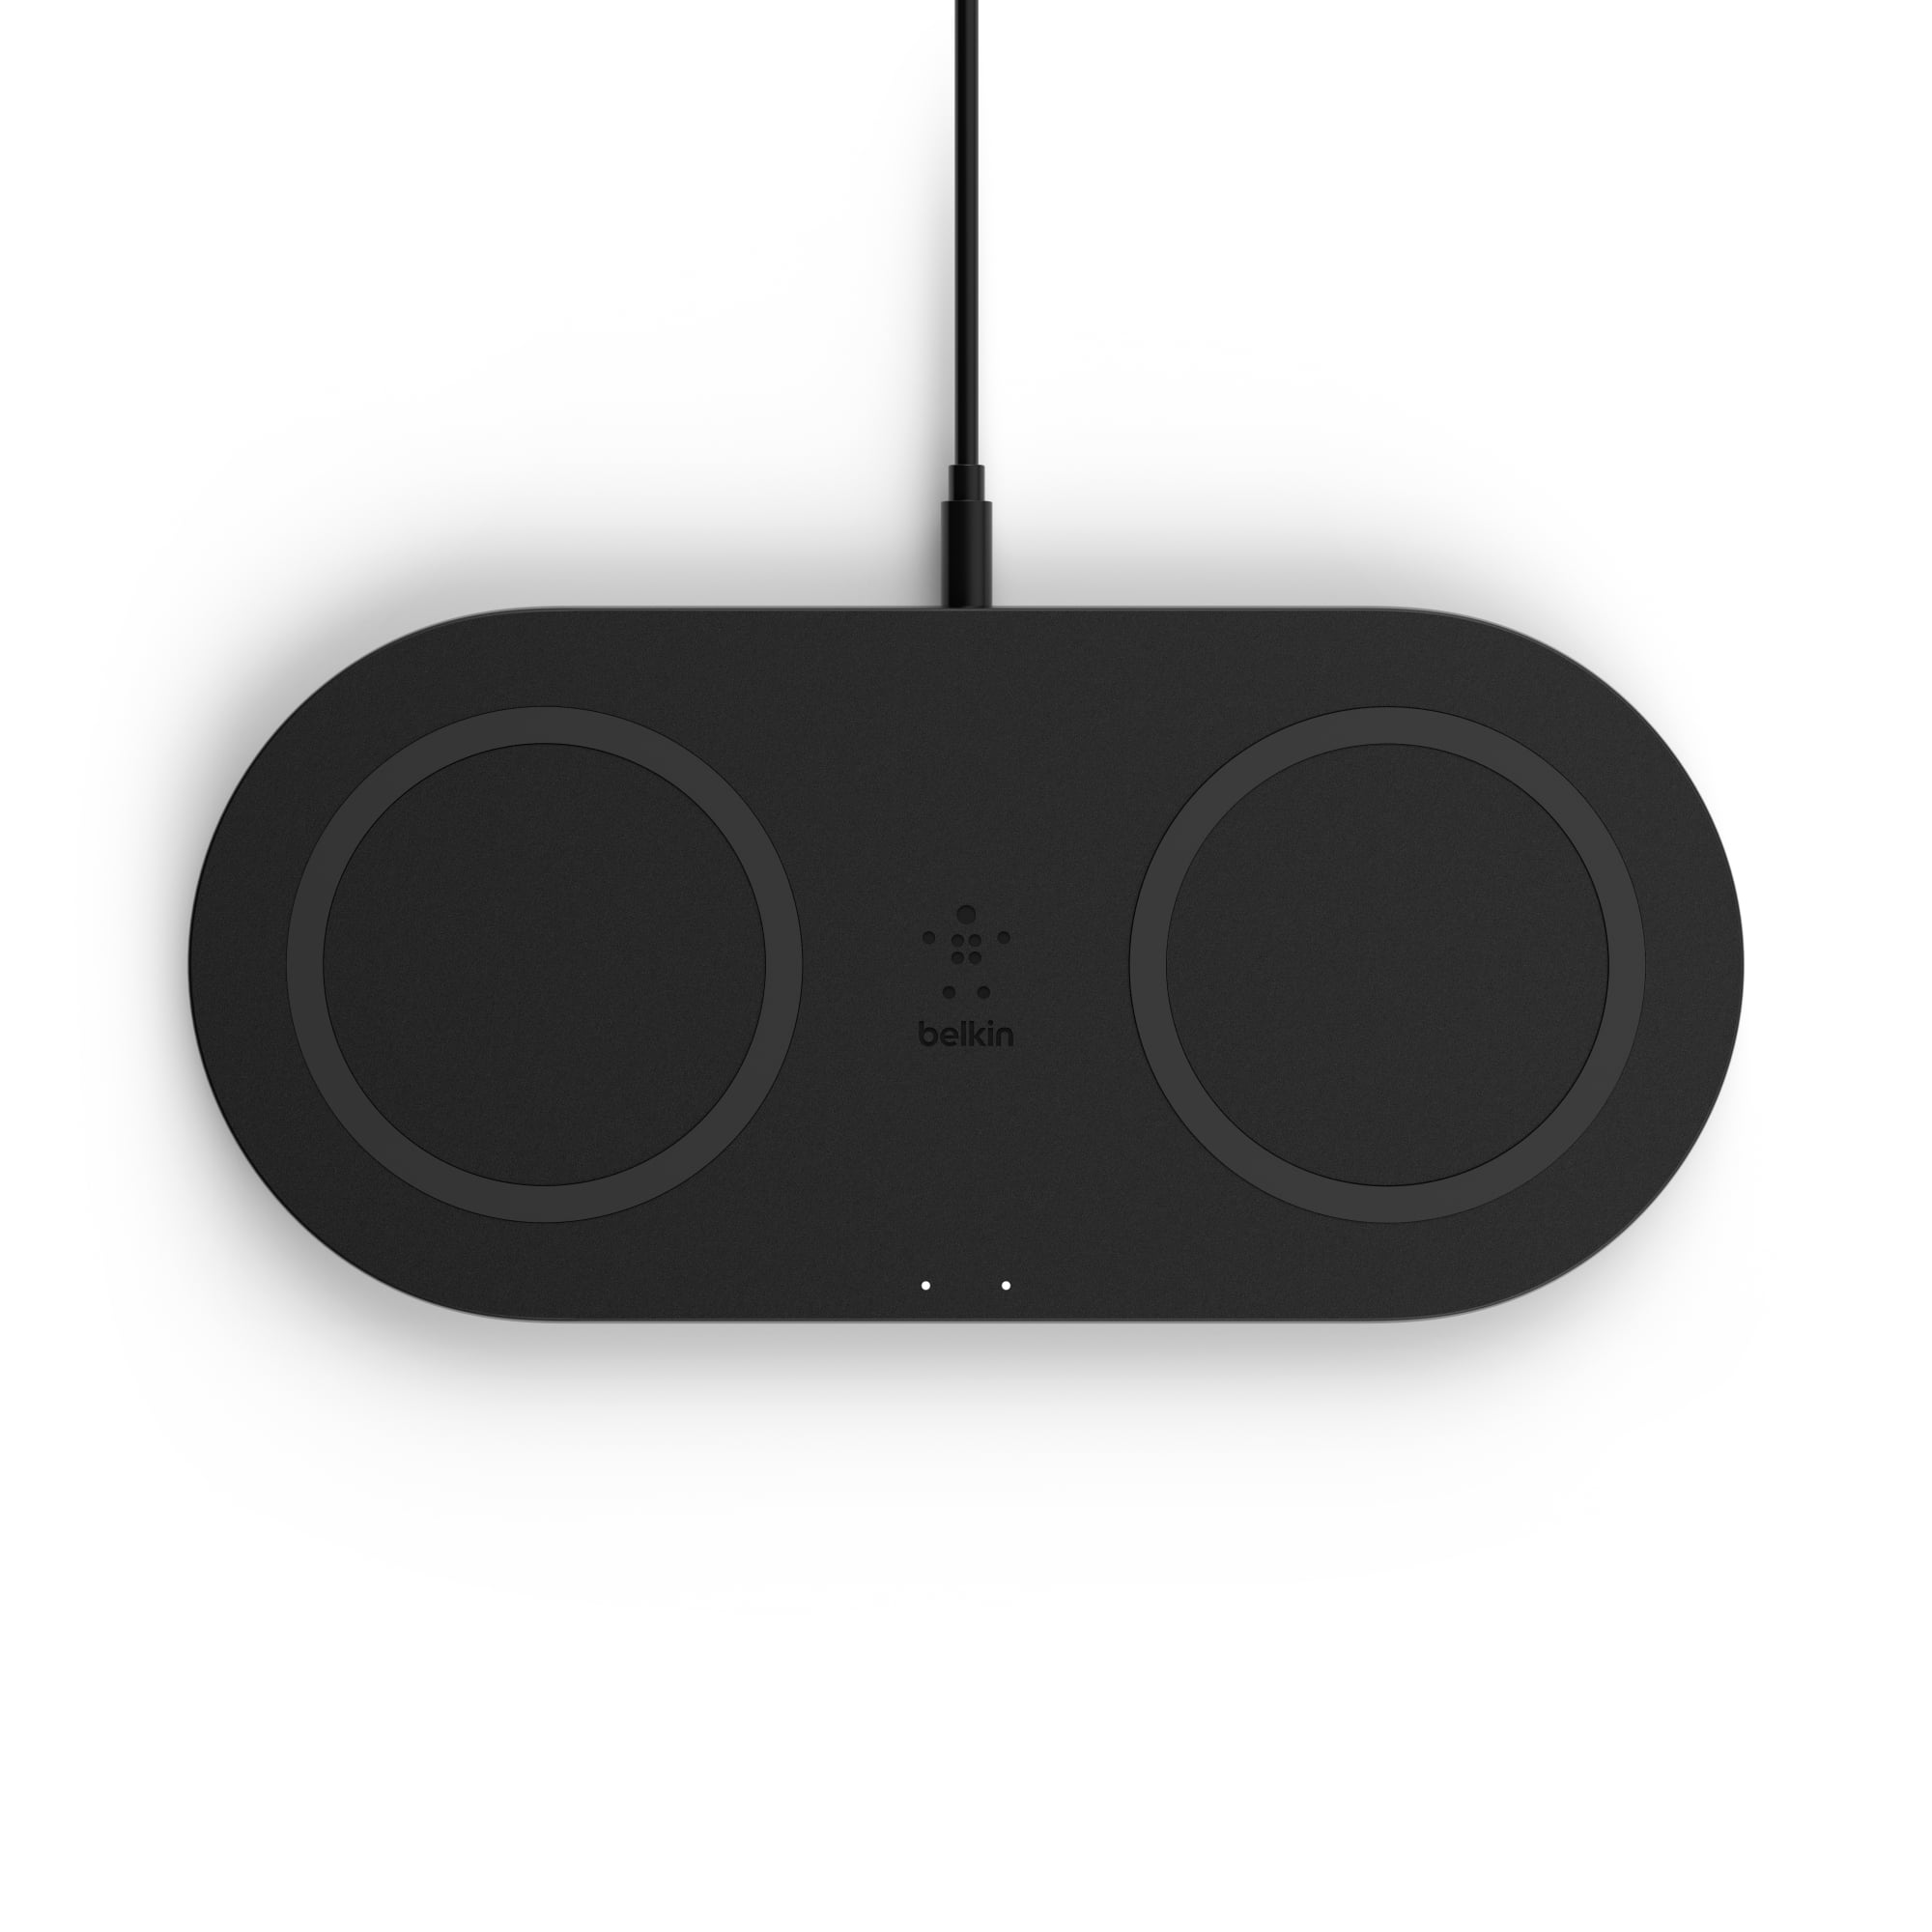 Belkin BOOSTCHARGE Dual Wireless Charging Pad, Charging up to 10W, Black